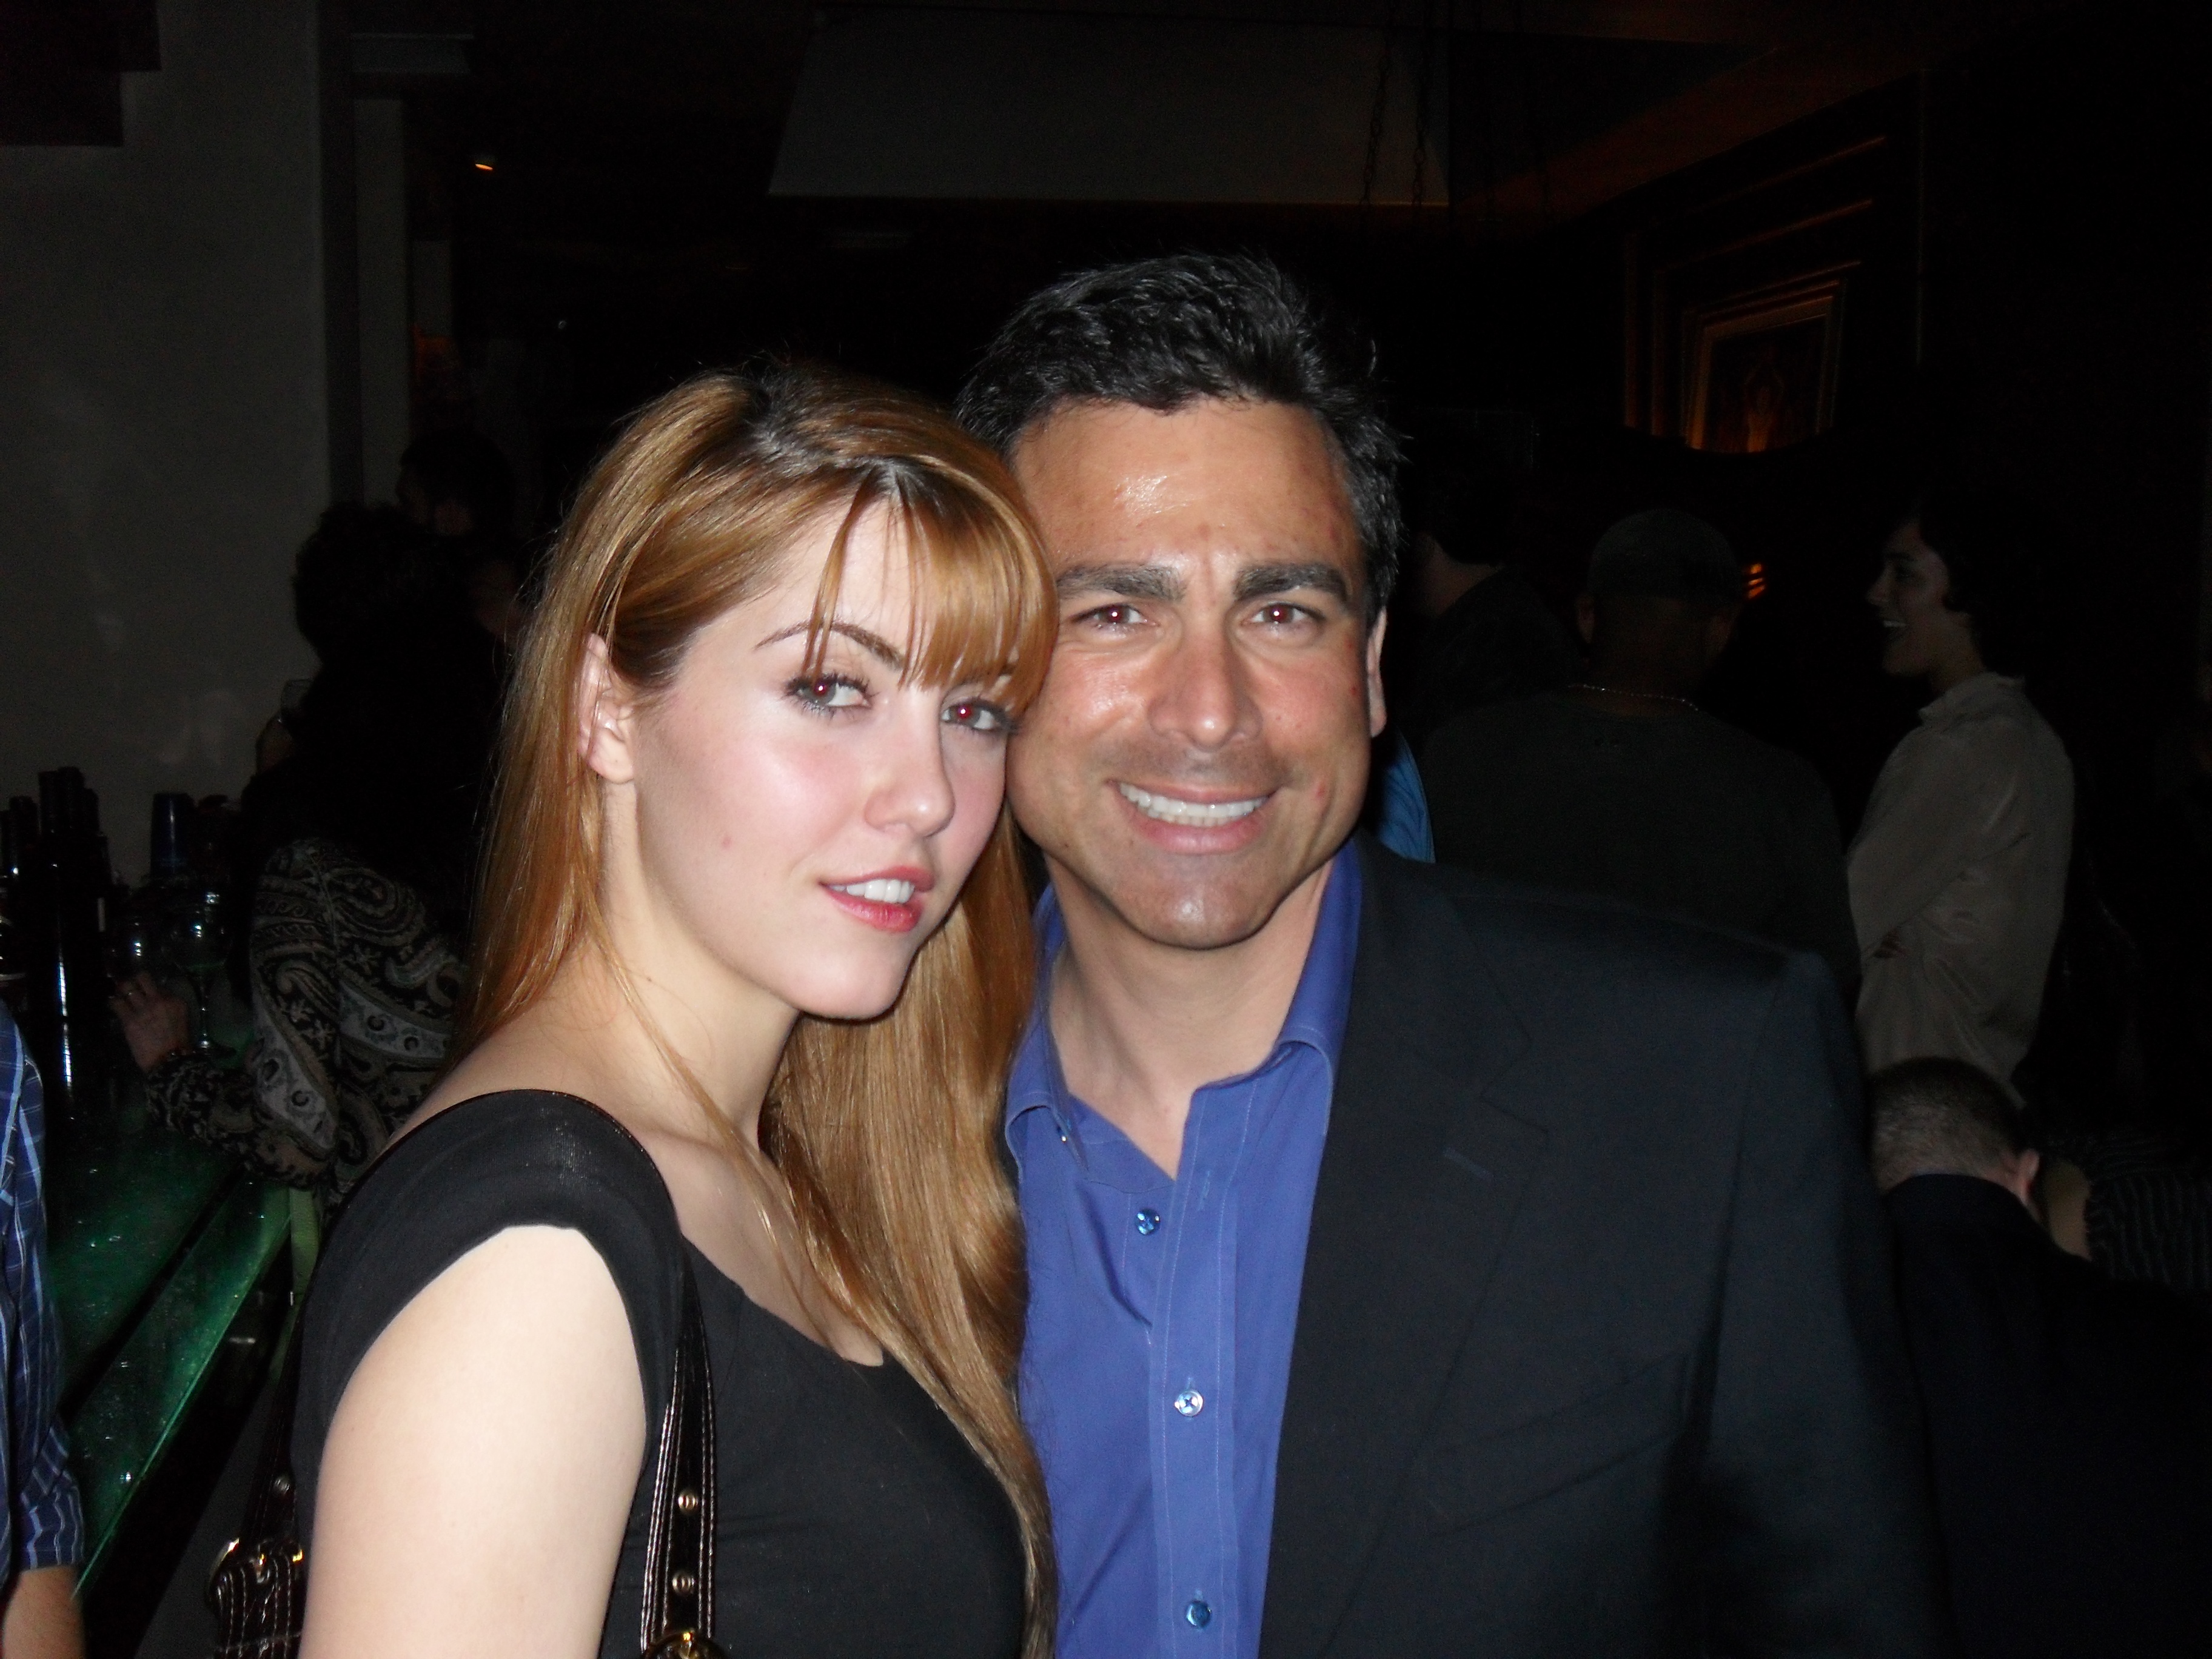 Yvonne Zima and John Prudhont at the Meeting Spencer Wrap Party in Beverly Hills